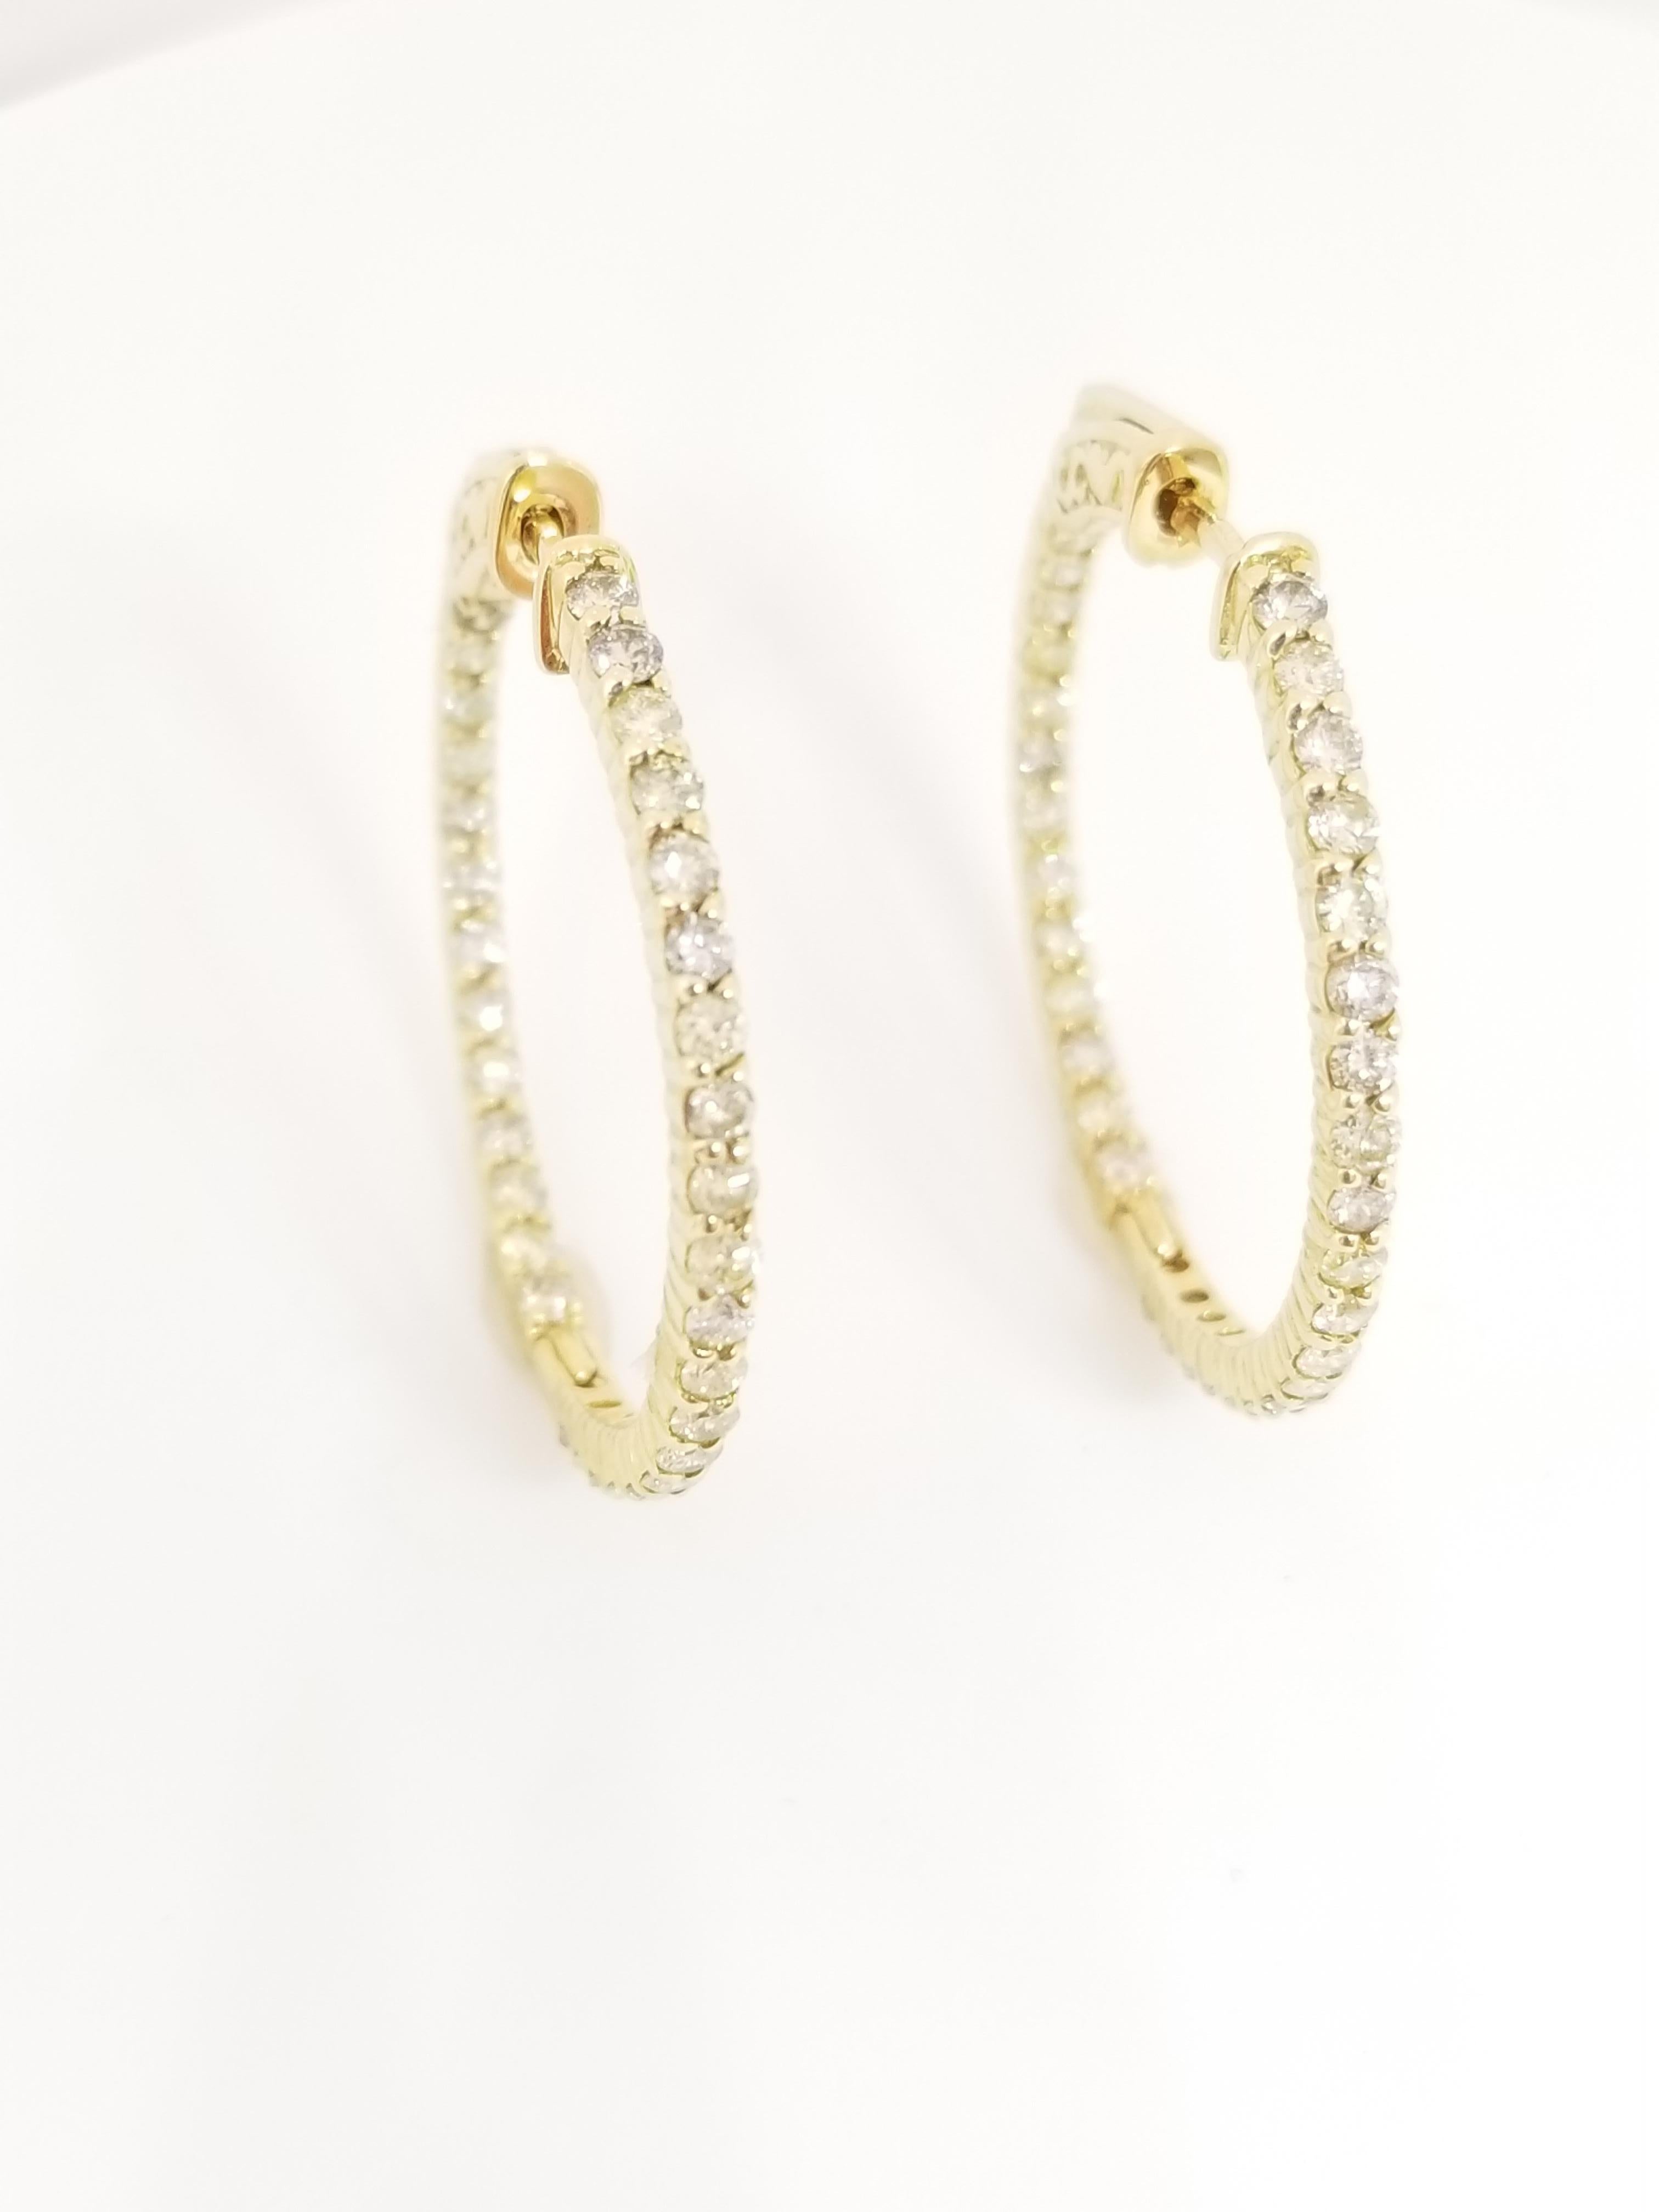 Beautiful pair of diamond inside out hoop earrings in 14k yellow gold. Secures with snap closure for wear. Elegance for every moment.

Average Color I, Clarity SI, 
Measures 1.25 inch in diameter. 